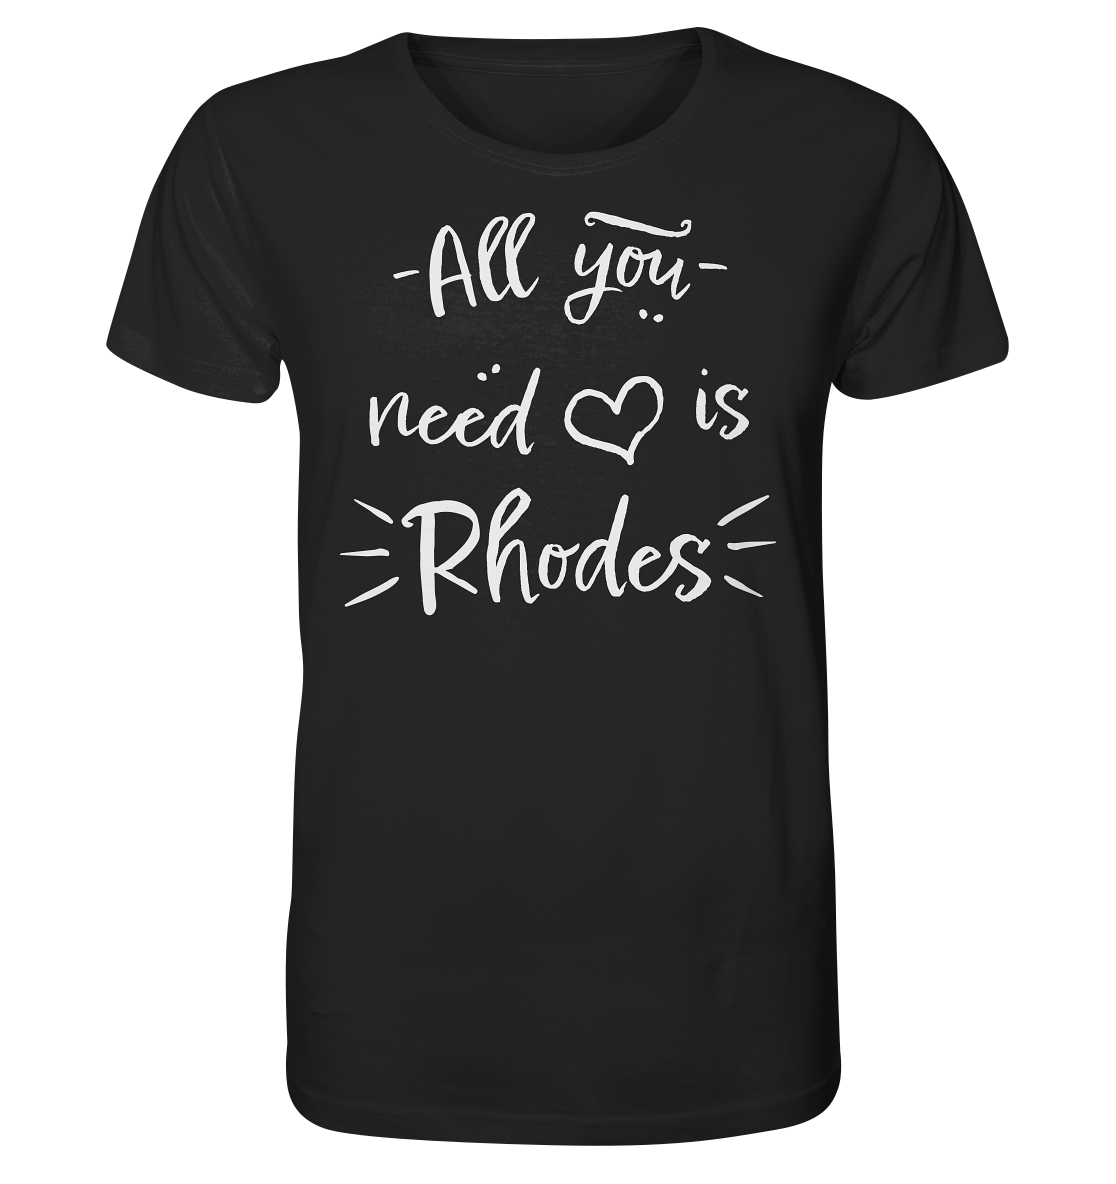 All you need is Rhodes - Organic Shirt